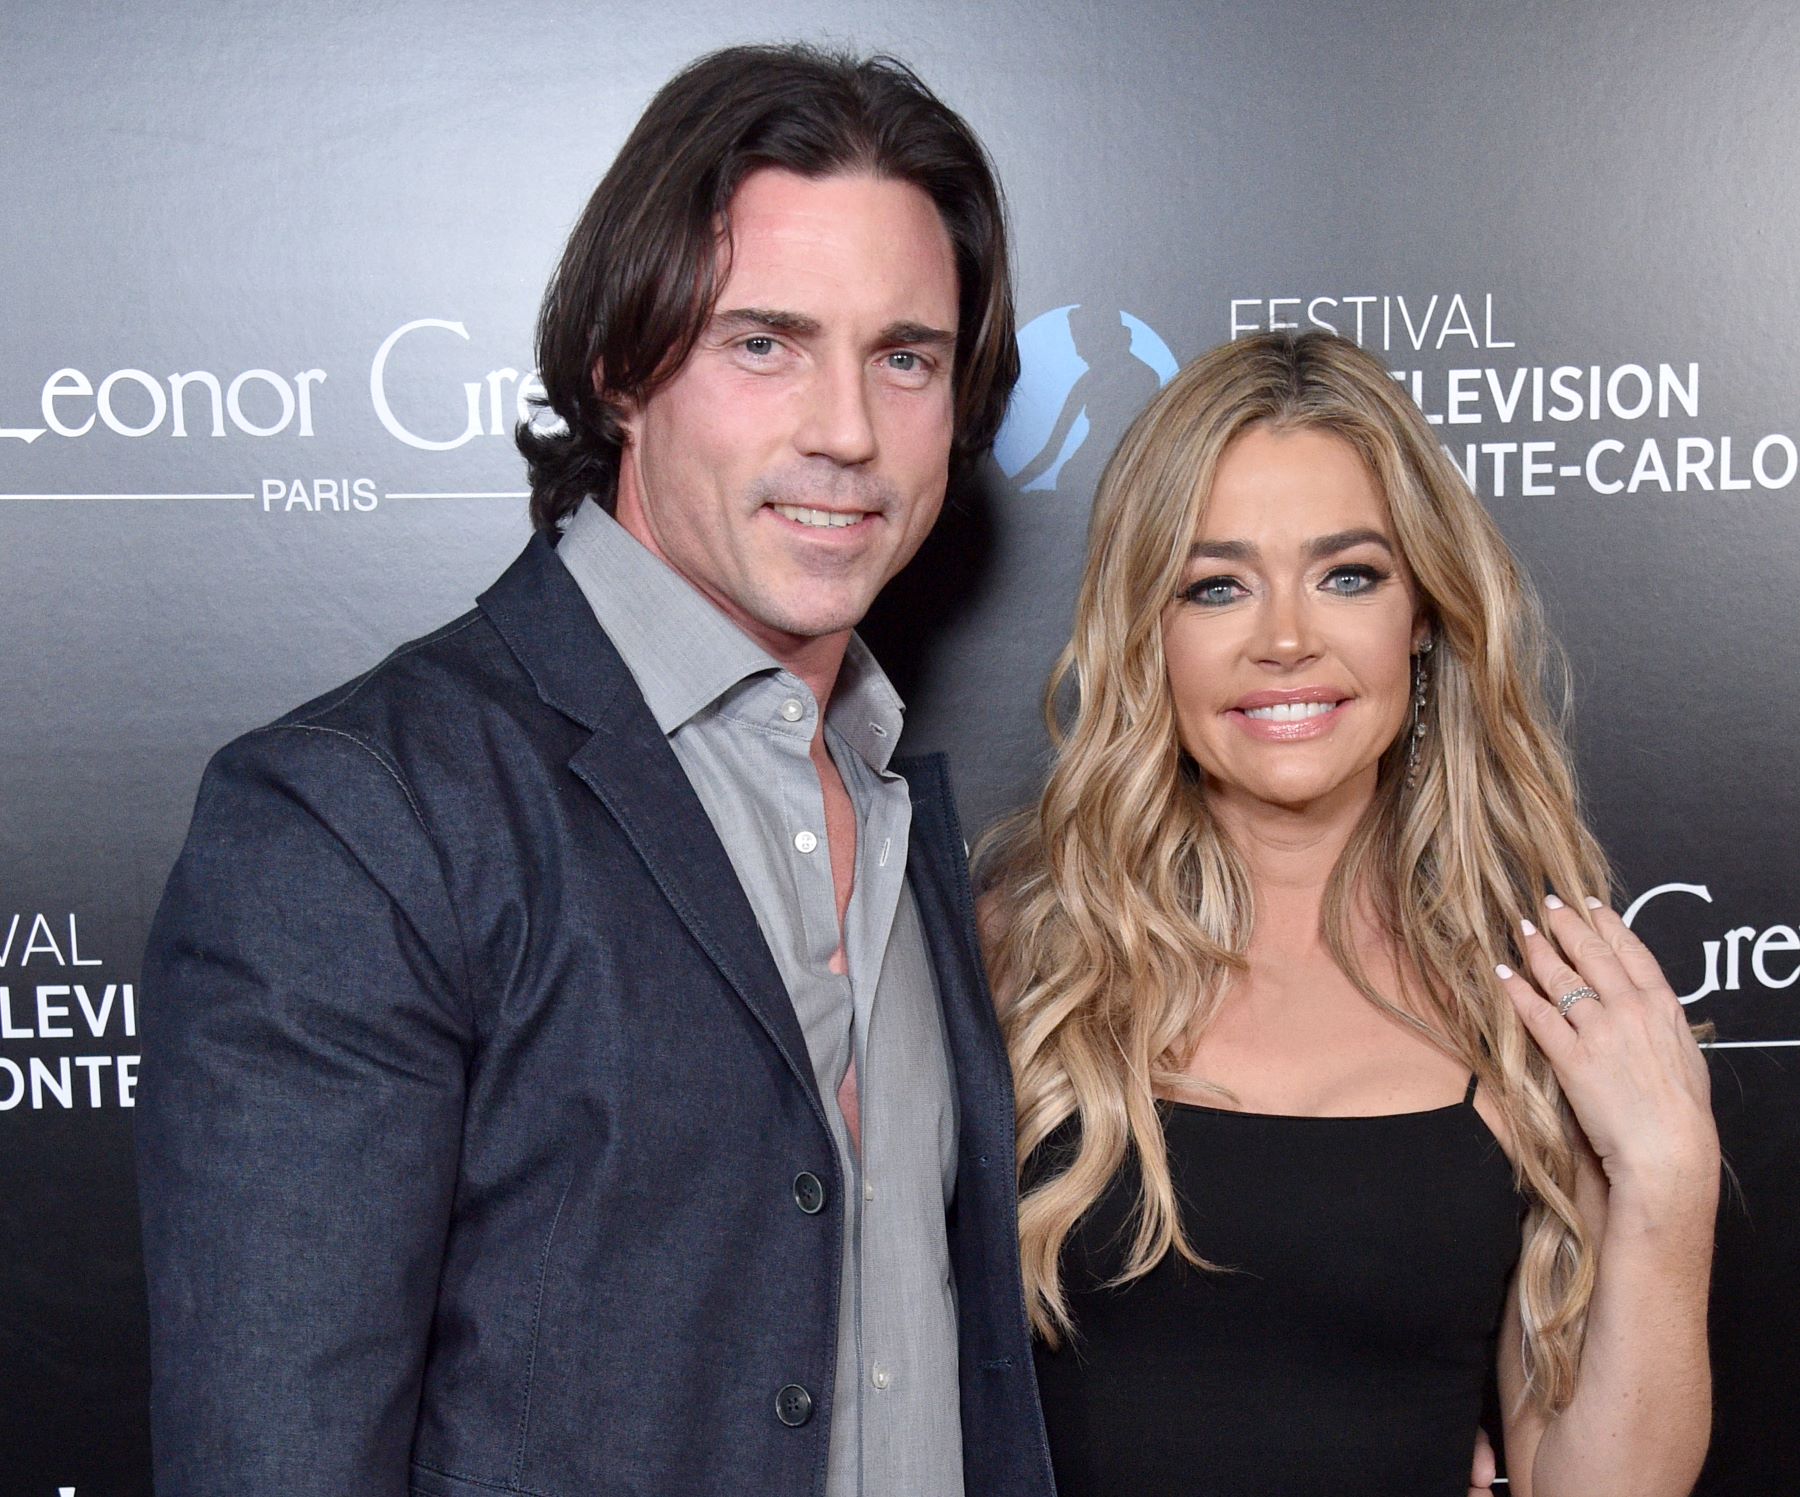 Aaron Phypers and Denise Richards of 'Real Housewives' attending the 60th Anniversary Party for the Monte-Carlo TV Festival